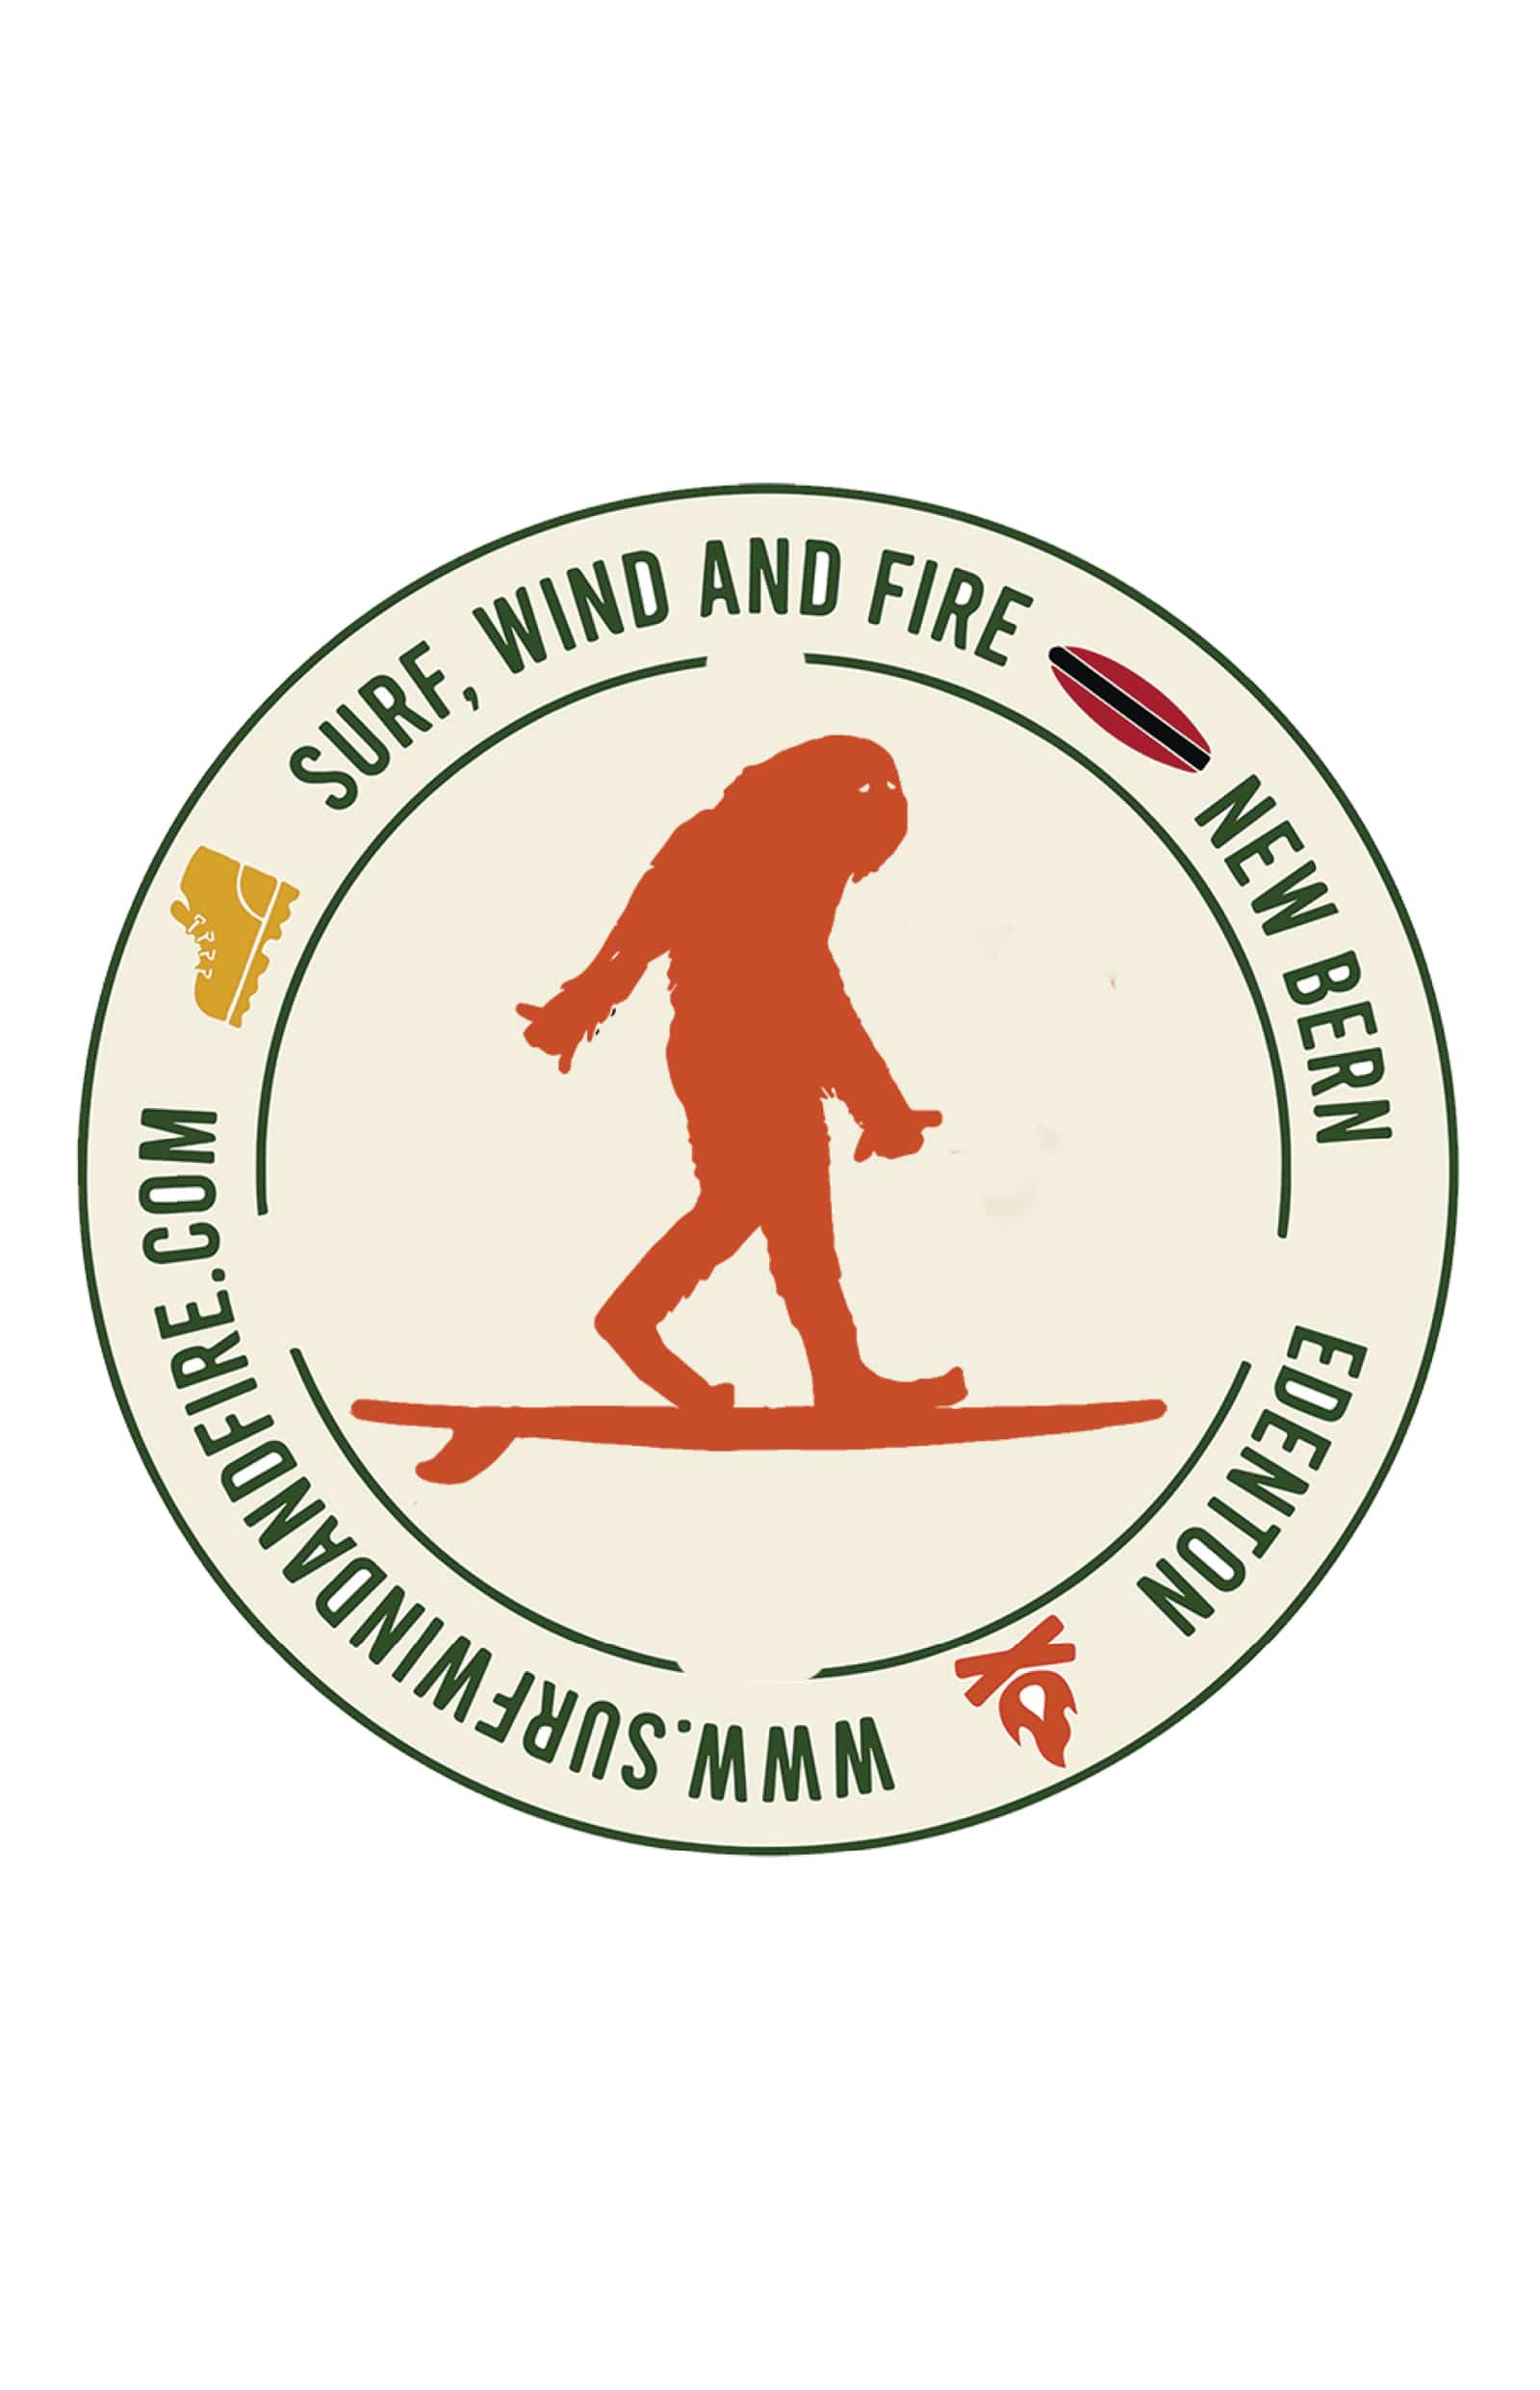 Surf, Wind and Fire – New Bern